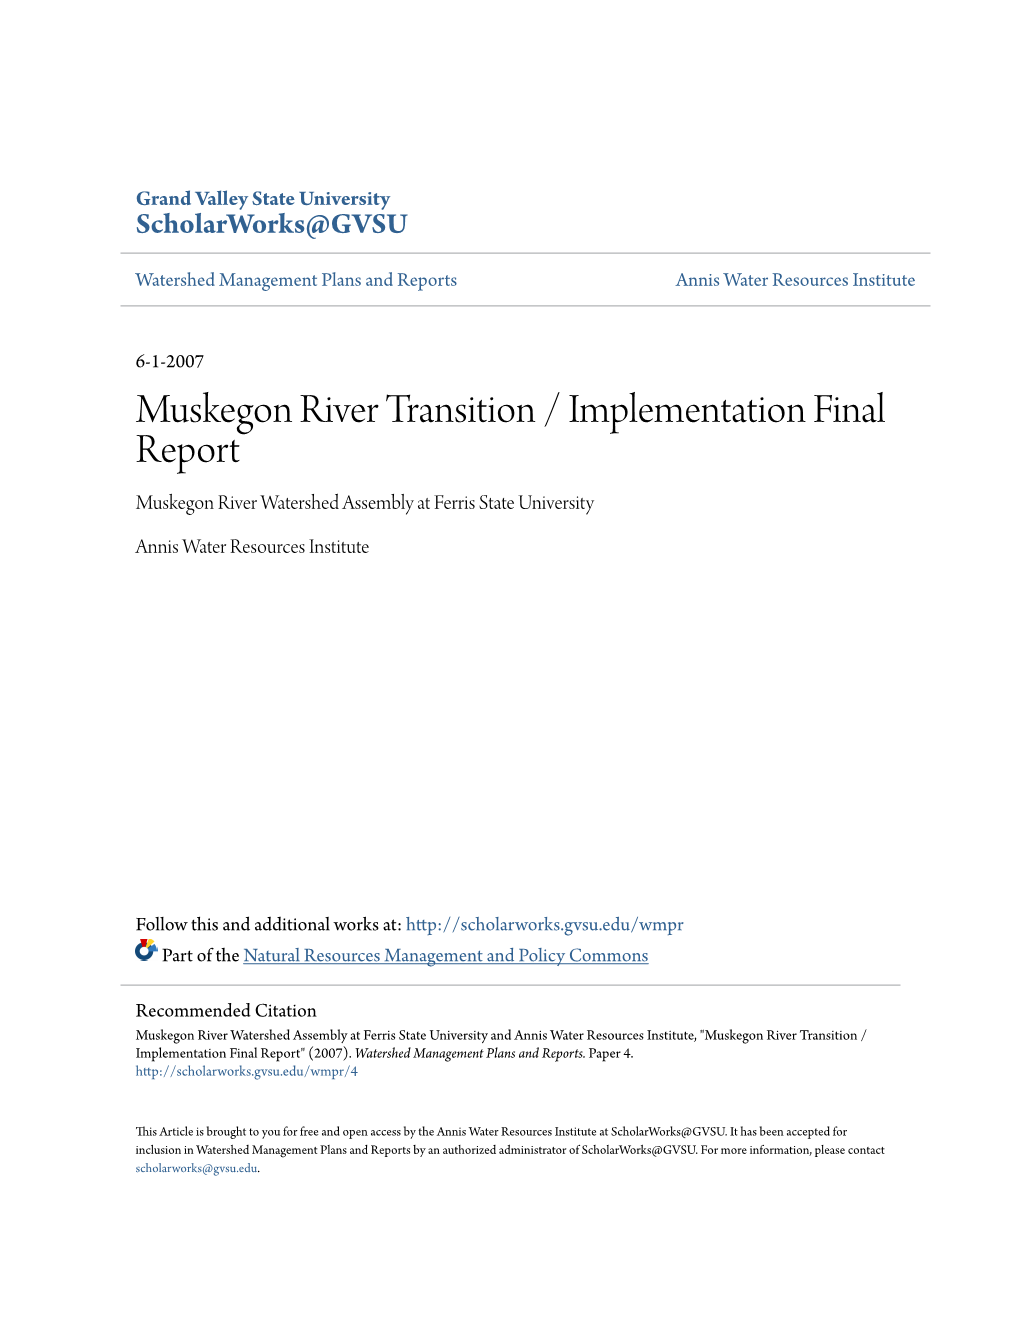 Muskegon River Transition / Implementation Final Report Muskegon River Watershed Assembly at Ferris State University